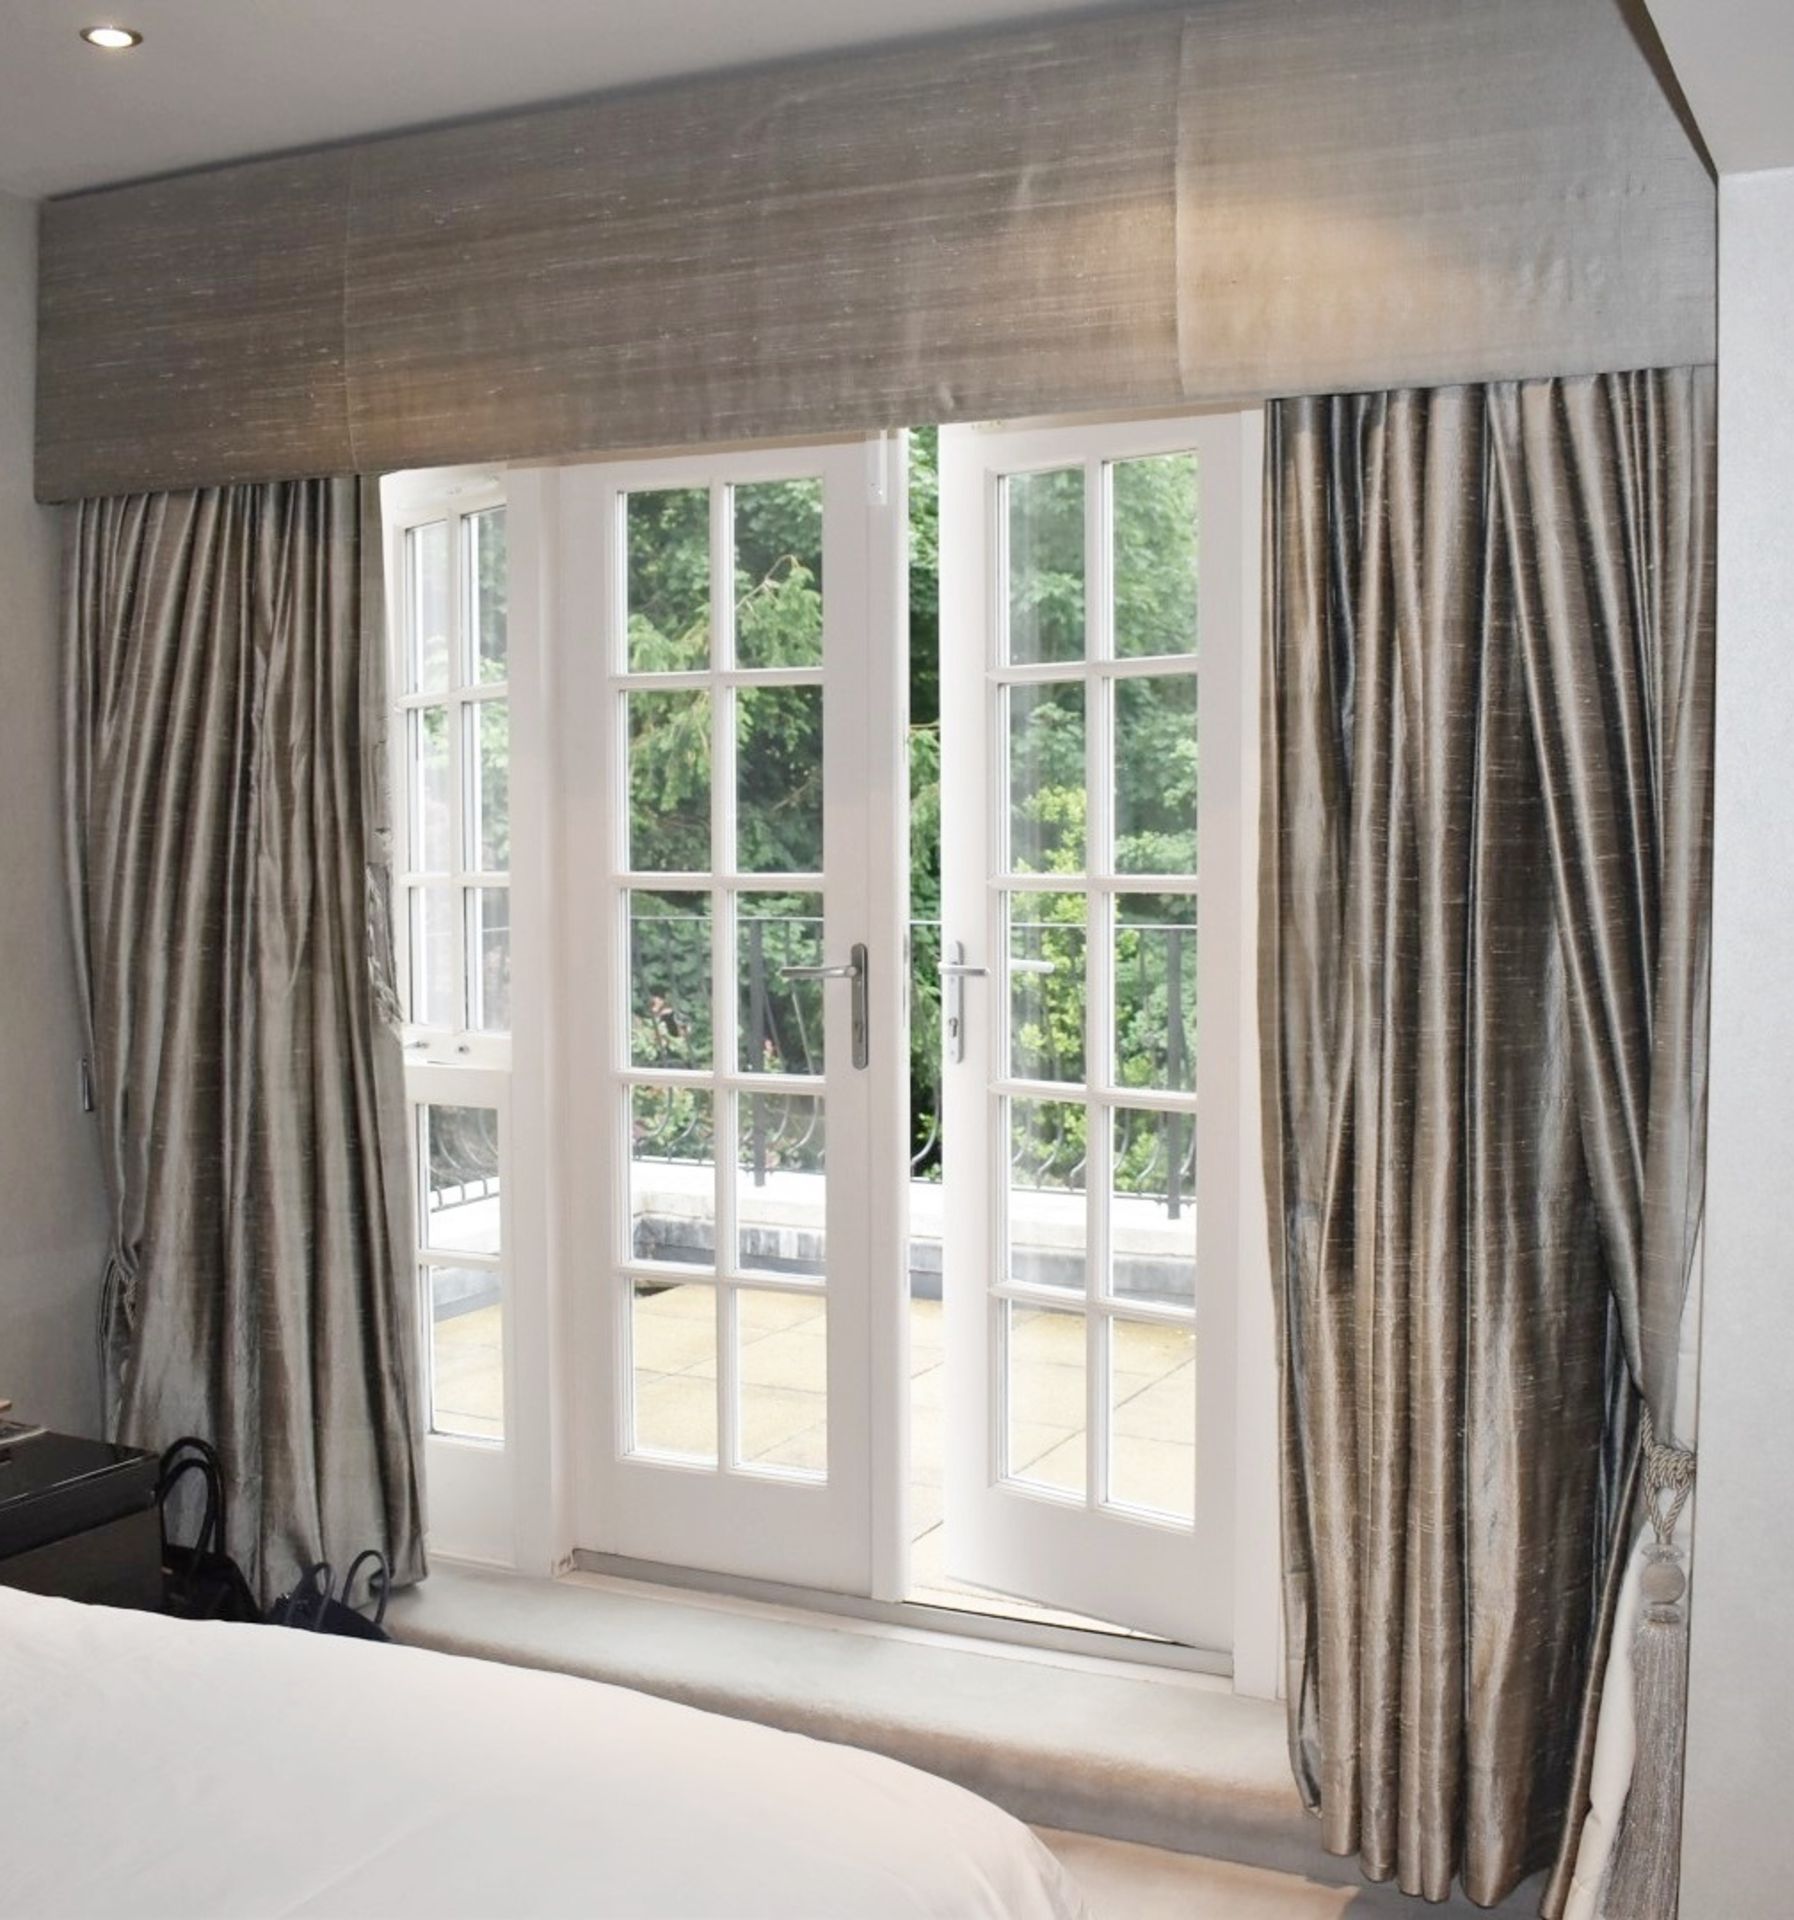 2 x Large Pairs Of Lined Curtains With 1 x Box Pelmet In Silver - Dimensions: H236 x W275cm *NO VAT*